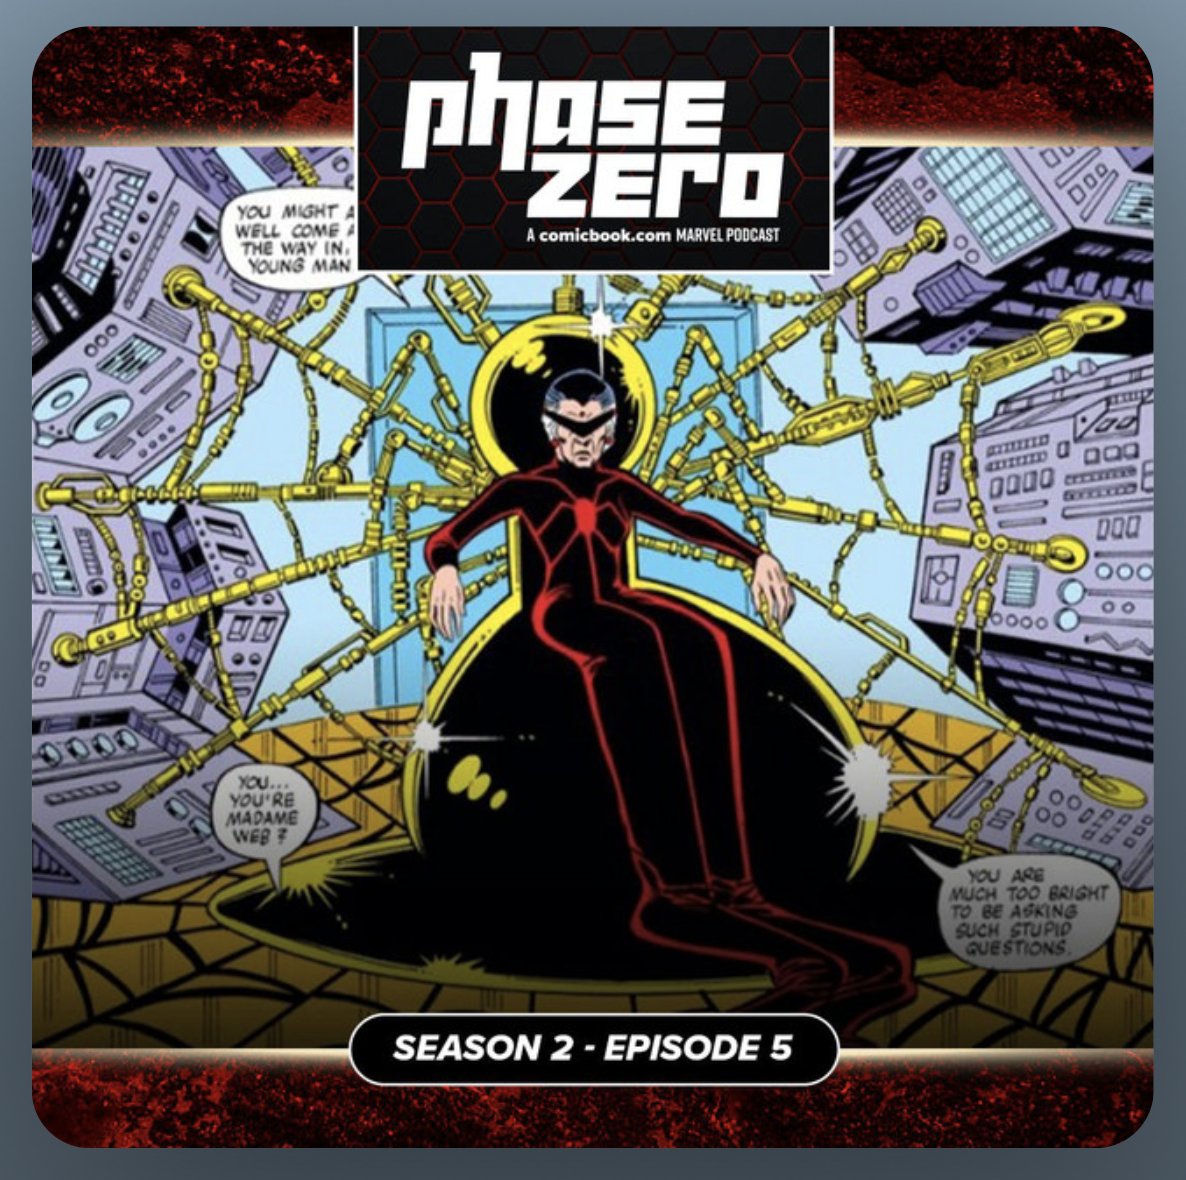 New episode of @PhaseZeroCB! 

MCU news & topics:
-Super Bowl trailers
-Madame Web news
-Valkyrie in Thor 4
-Spider-Verse/MCU madness
-Guardians Vol. 3 sadness

Download & subscribe--
Apple: https://t.co/ciVIXsC5gl
Spotify: https://t.co/o3tq5vH2Dy https://t.co/yeQ7gg0Zzm